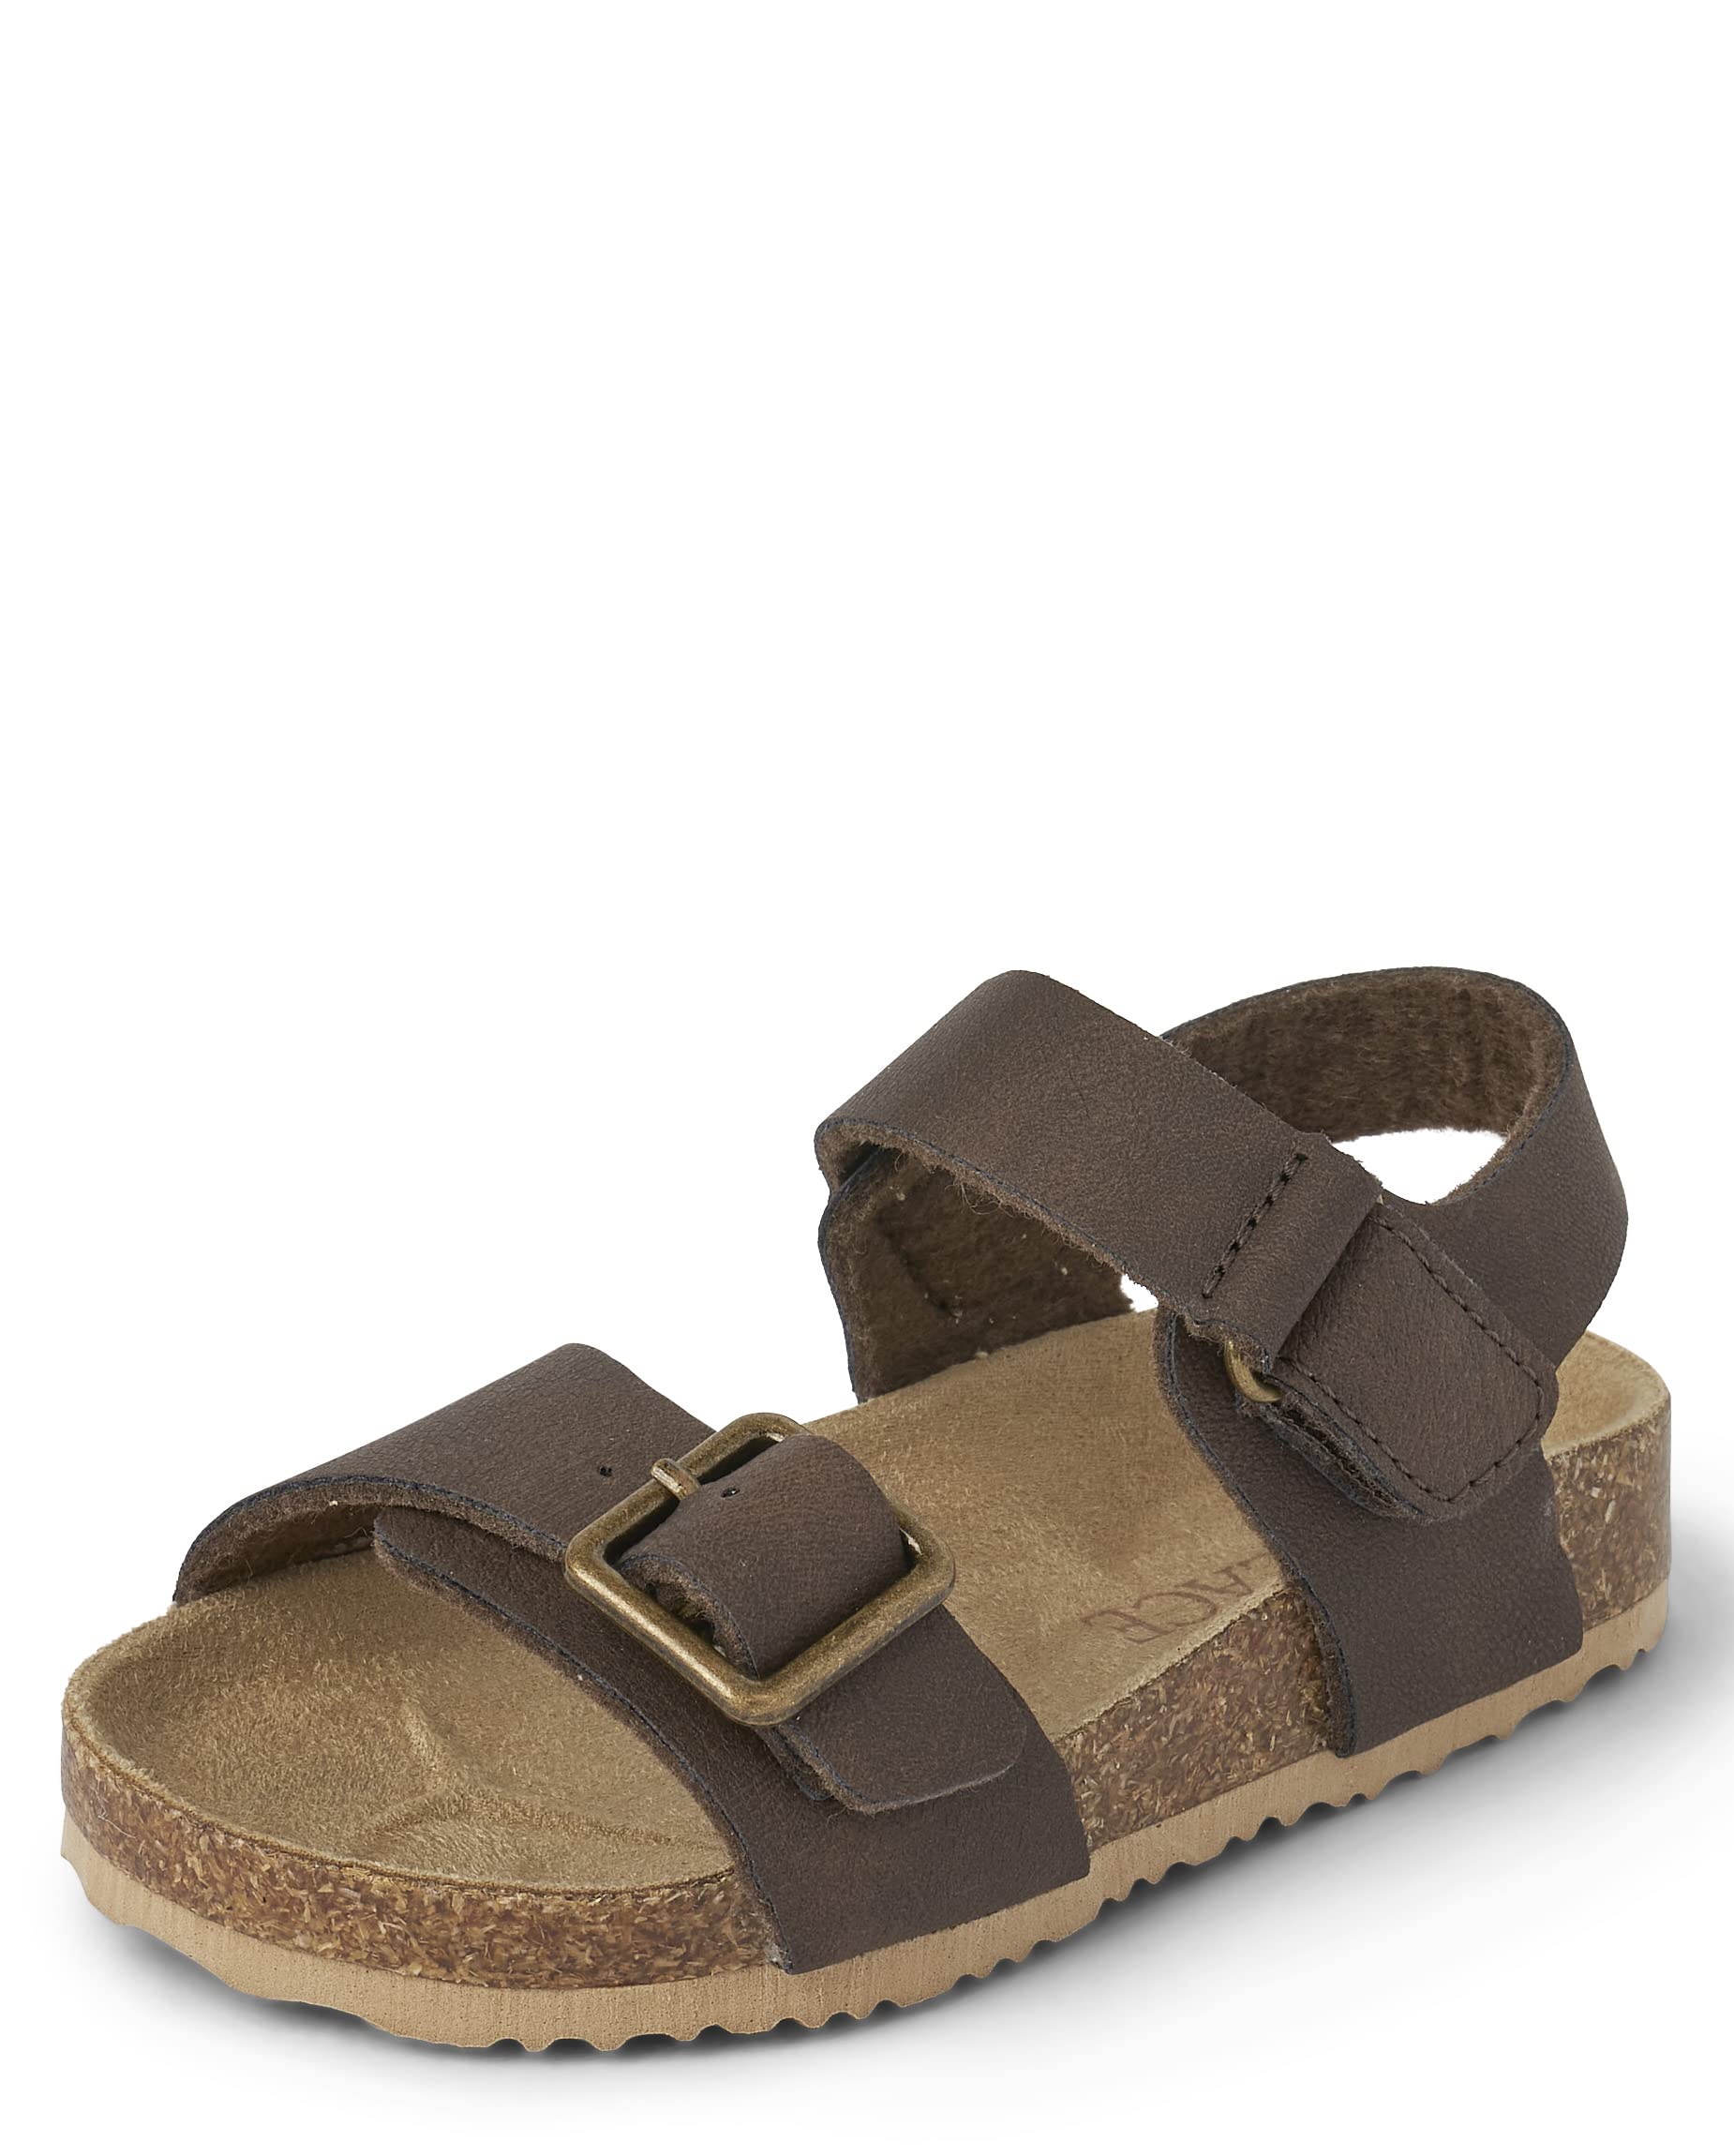 The Children's Place Toddler Boys Buckle Sandals Slide, Browns, 6